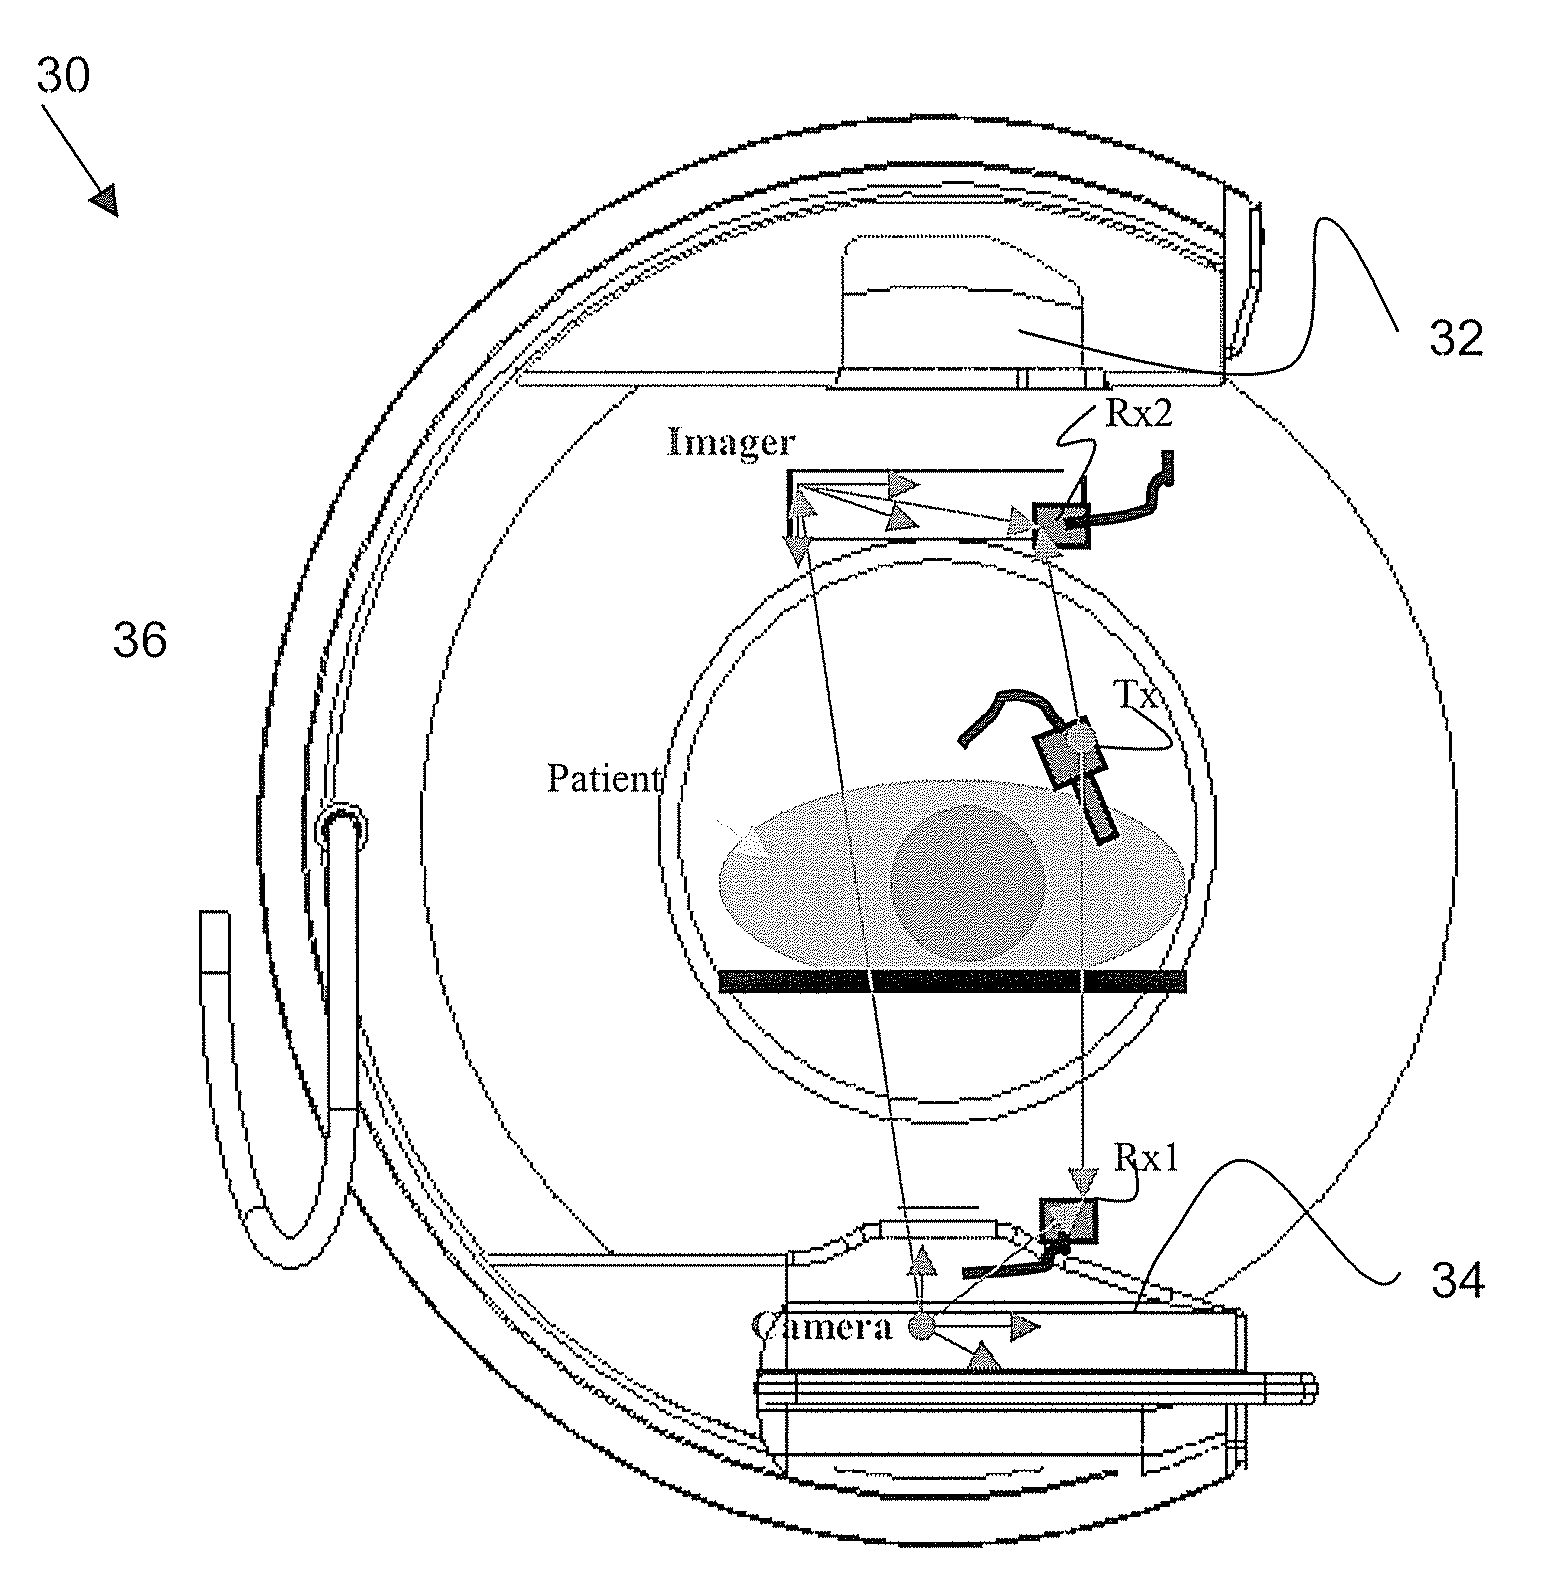 Systems and methods for on-line marker-less camera calibration using a position tracking system